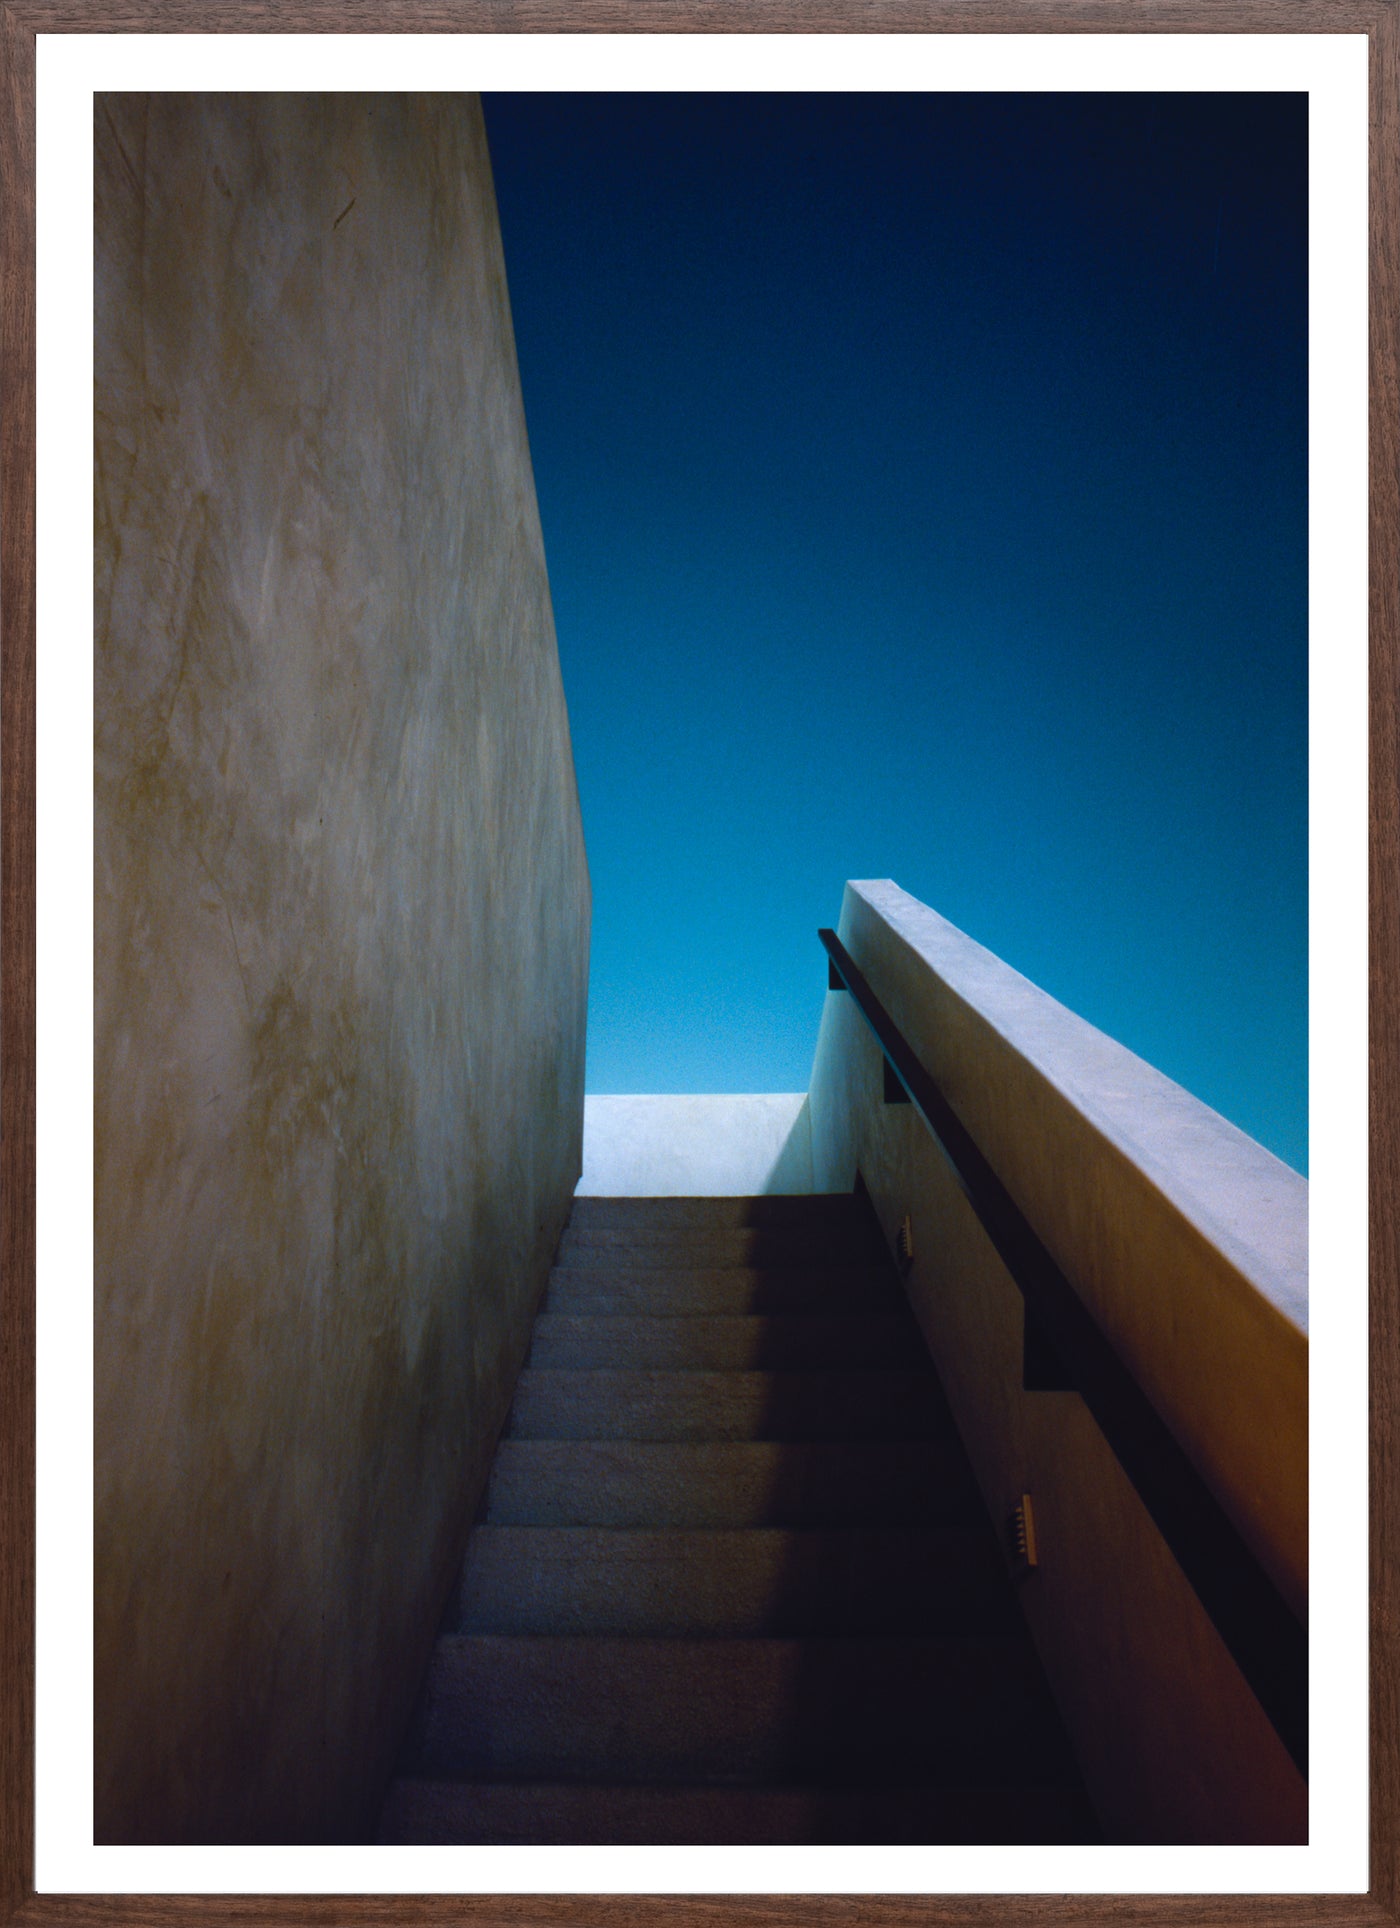 Stairway To The Night / LA series, 2018